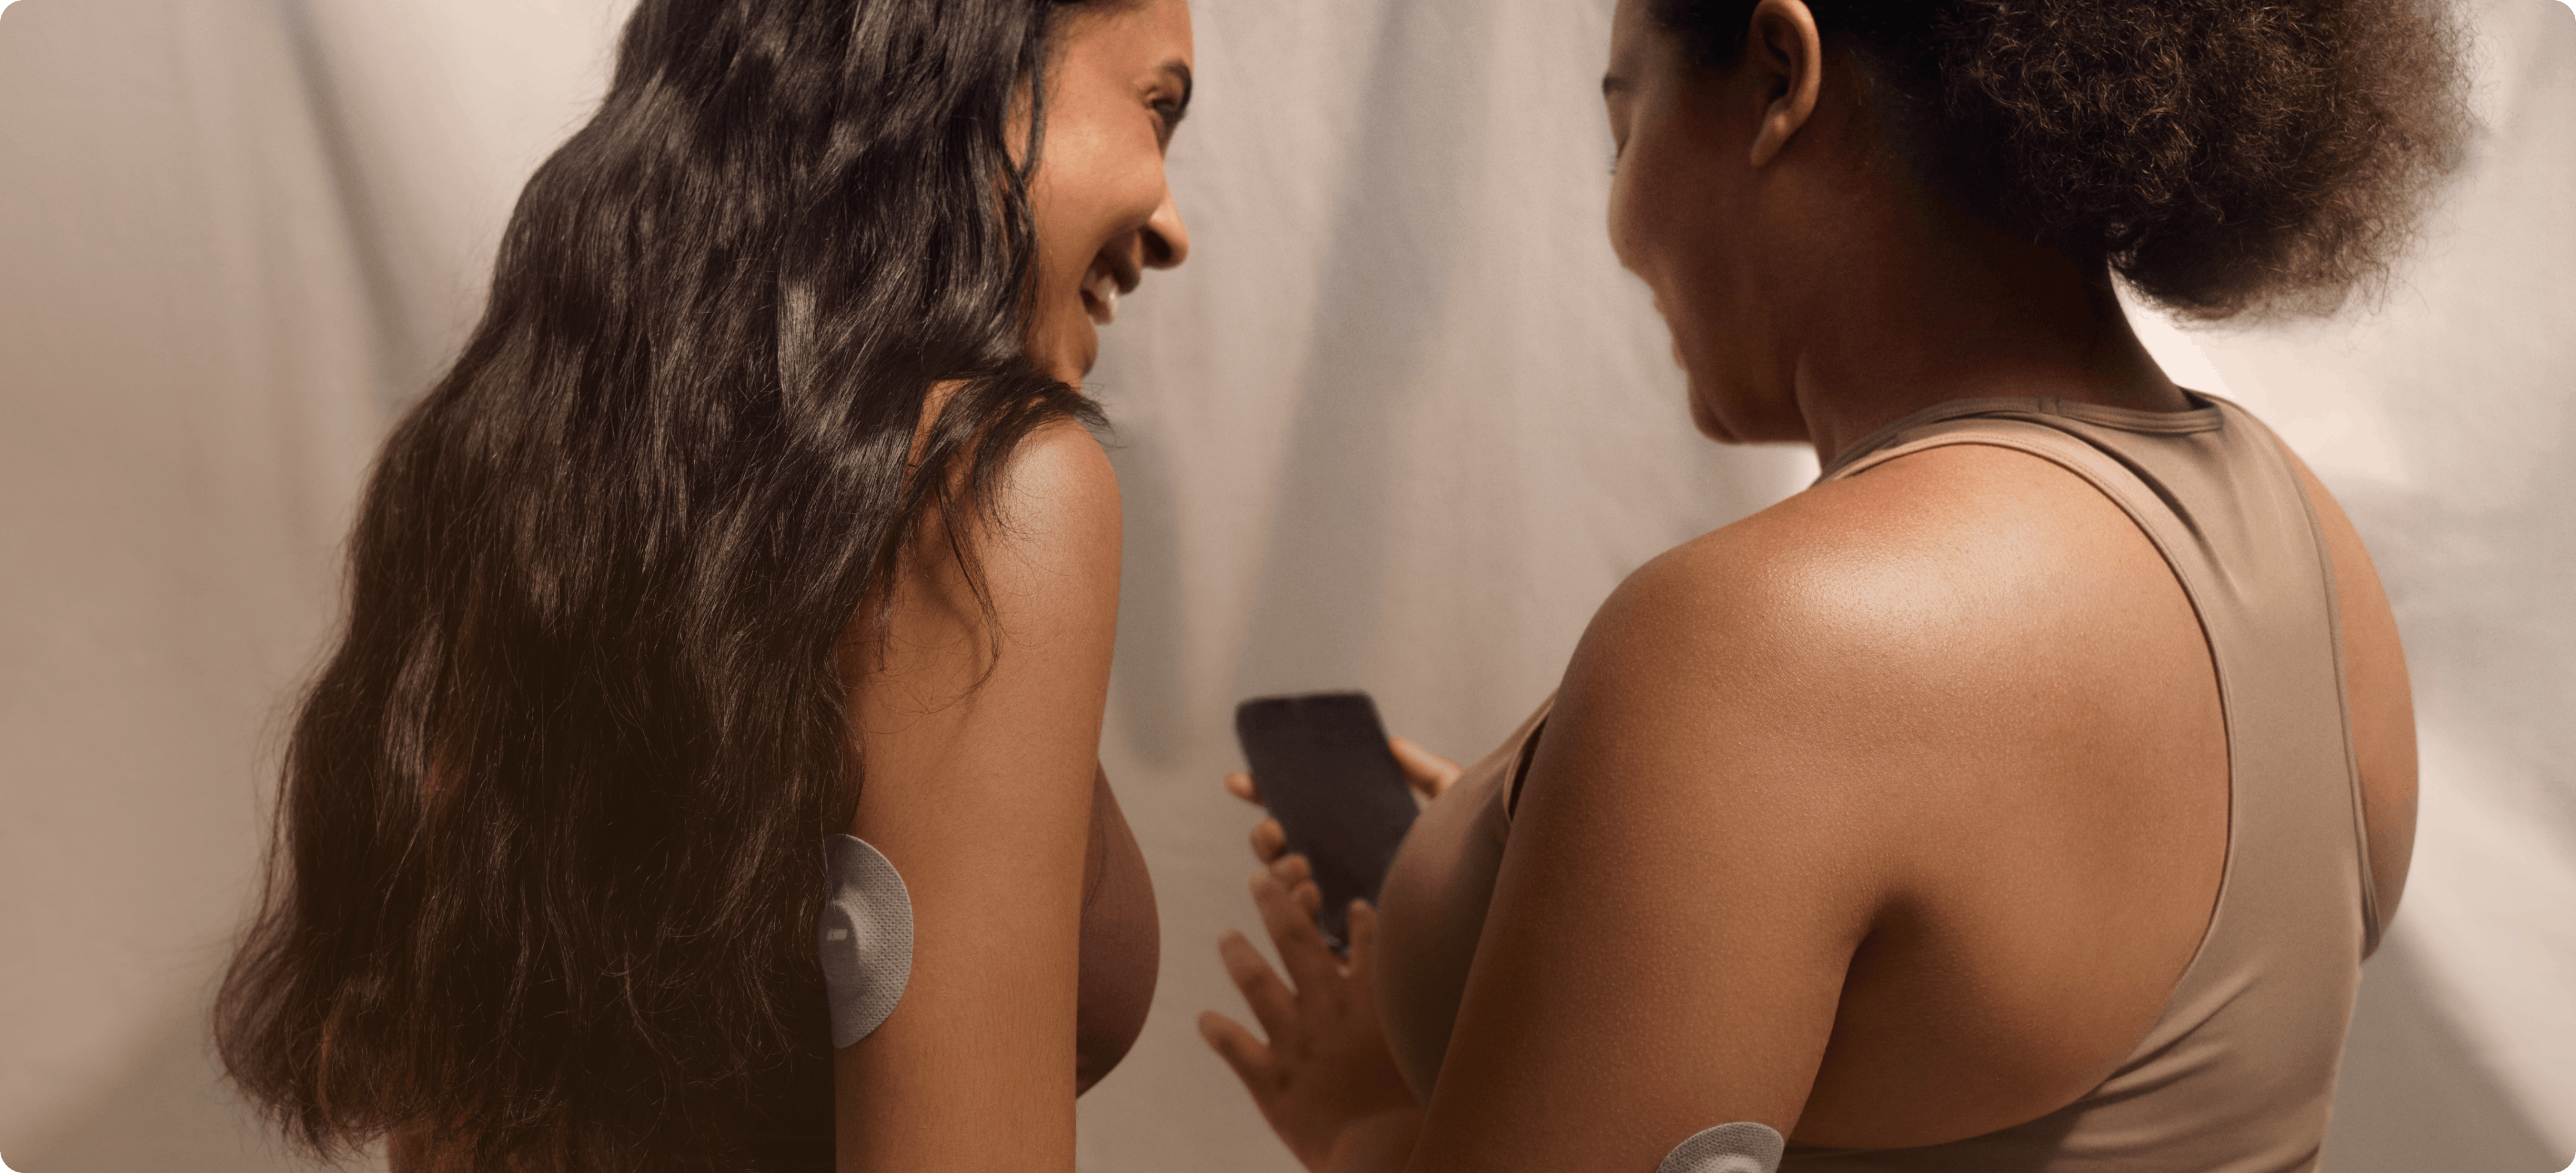 woman showing smiling friend her health improvement from monitoring blood sugar with Veri